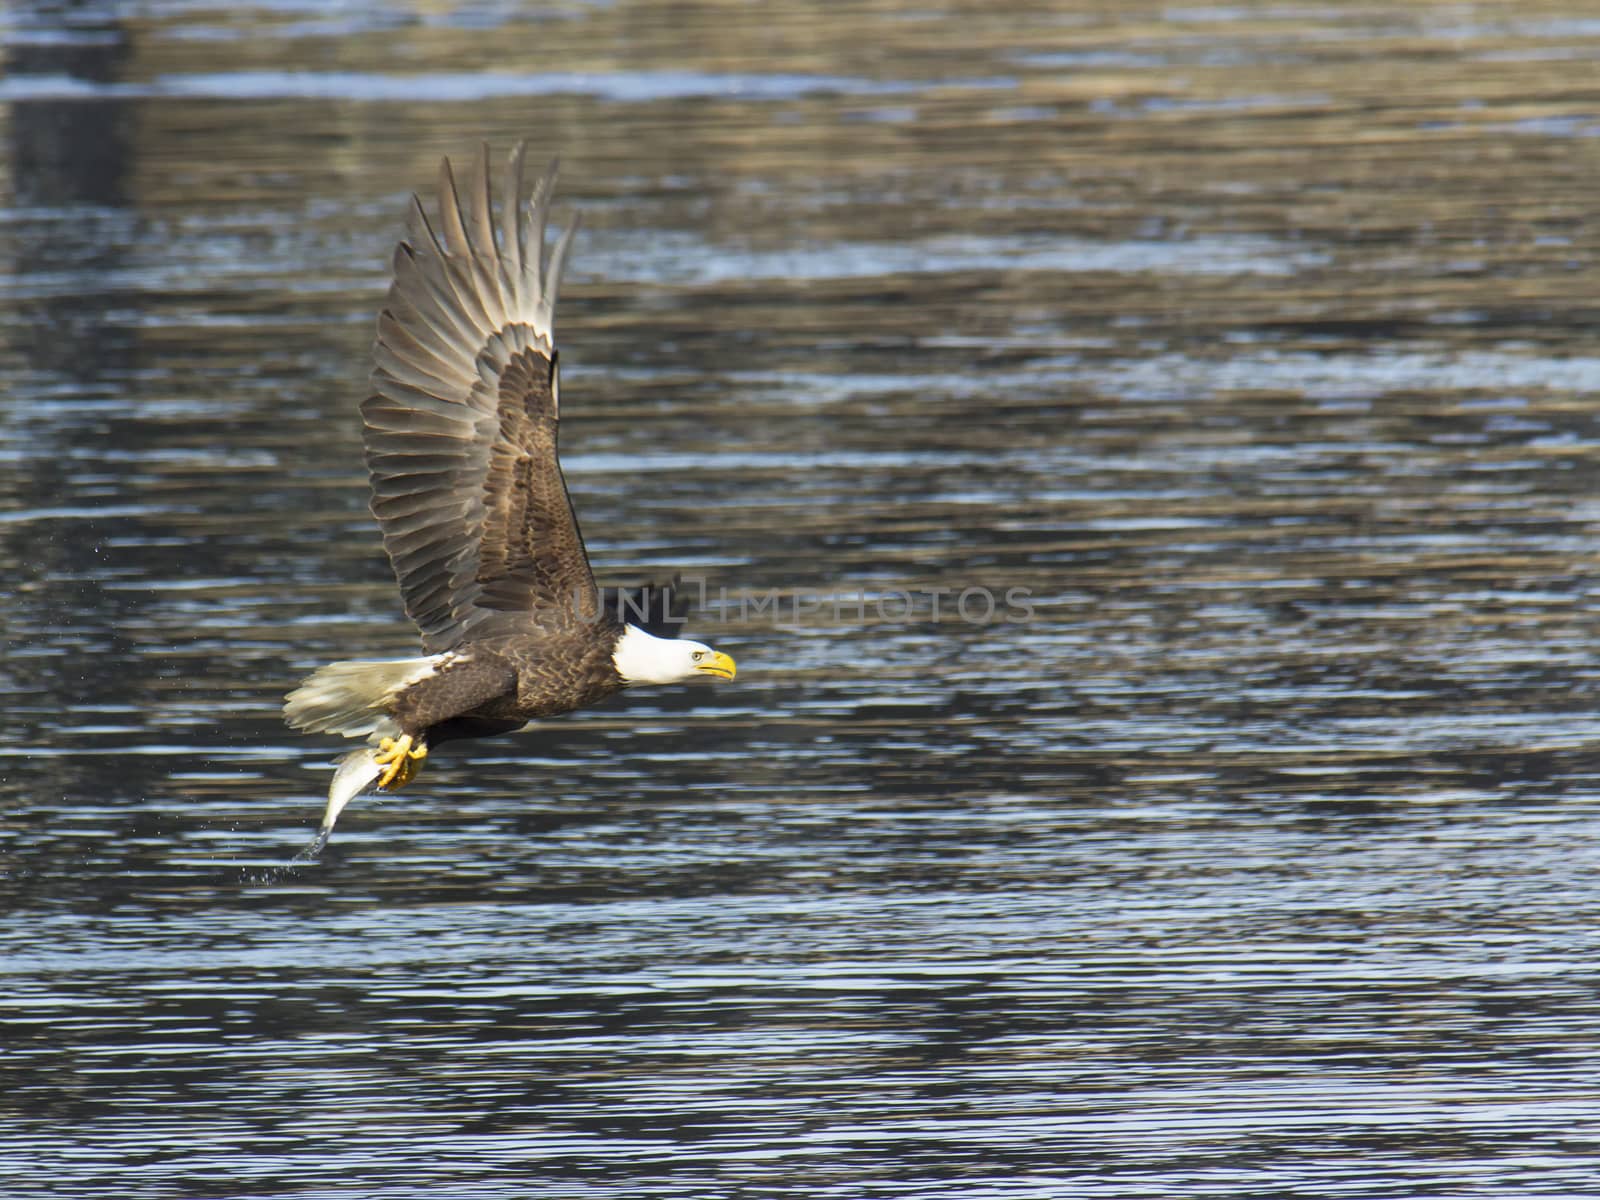 Adult bald eagle with fish caught at Conowingo Dam on the Susquehanna River.